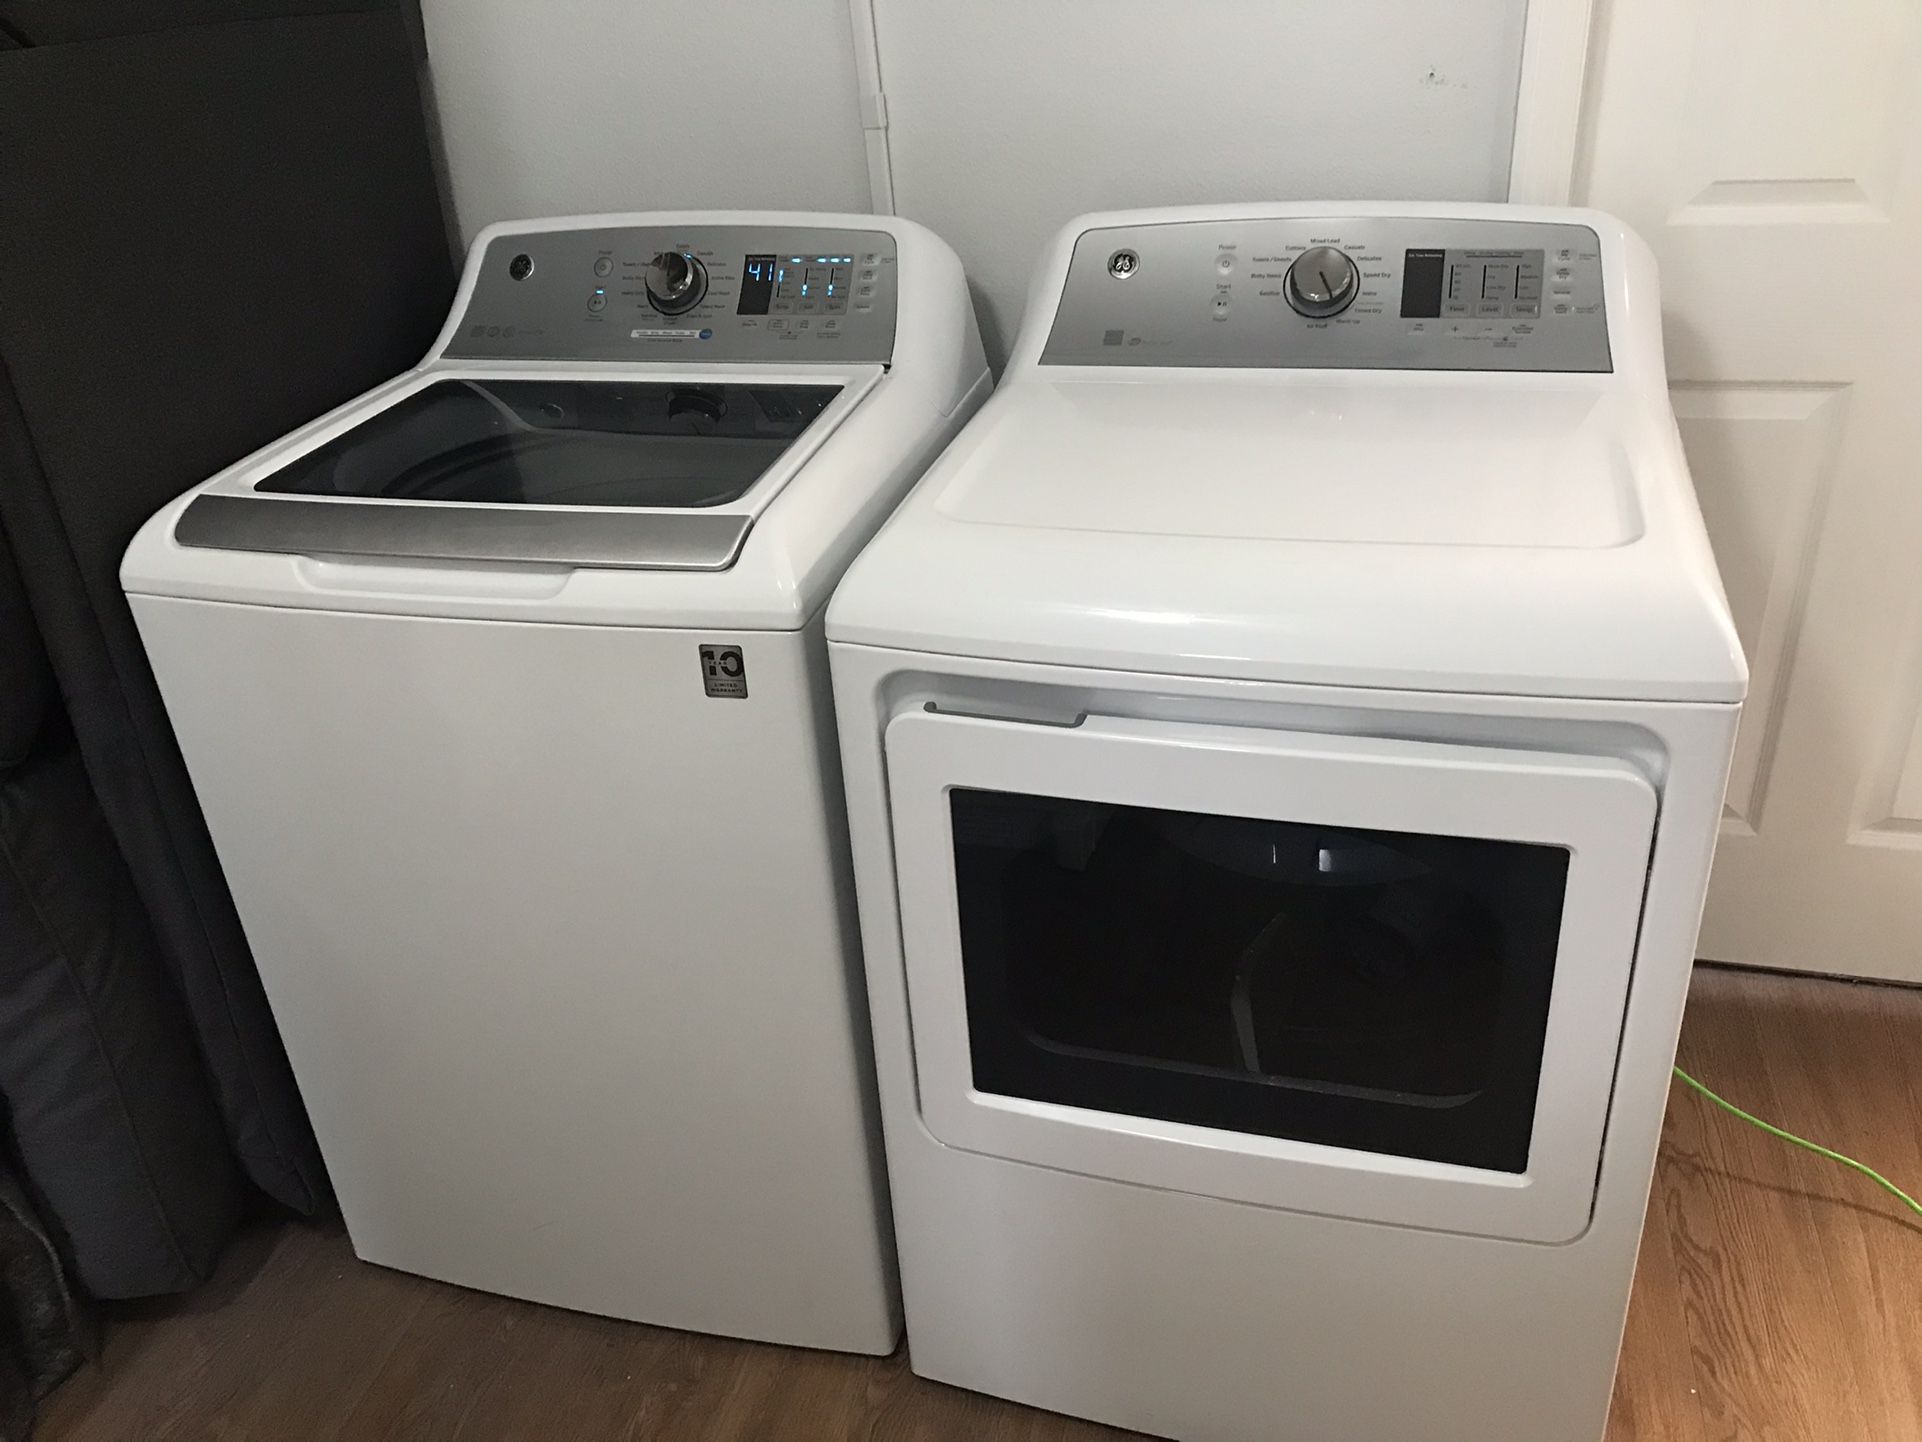 Washer and dryer like brand new